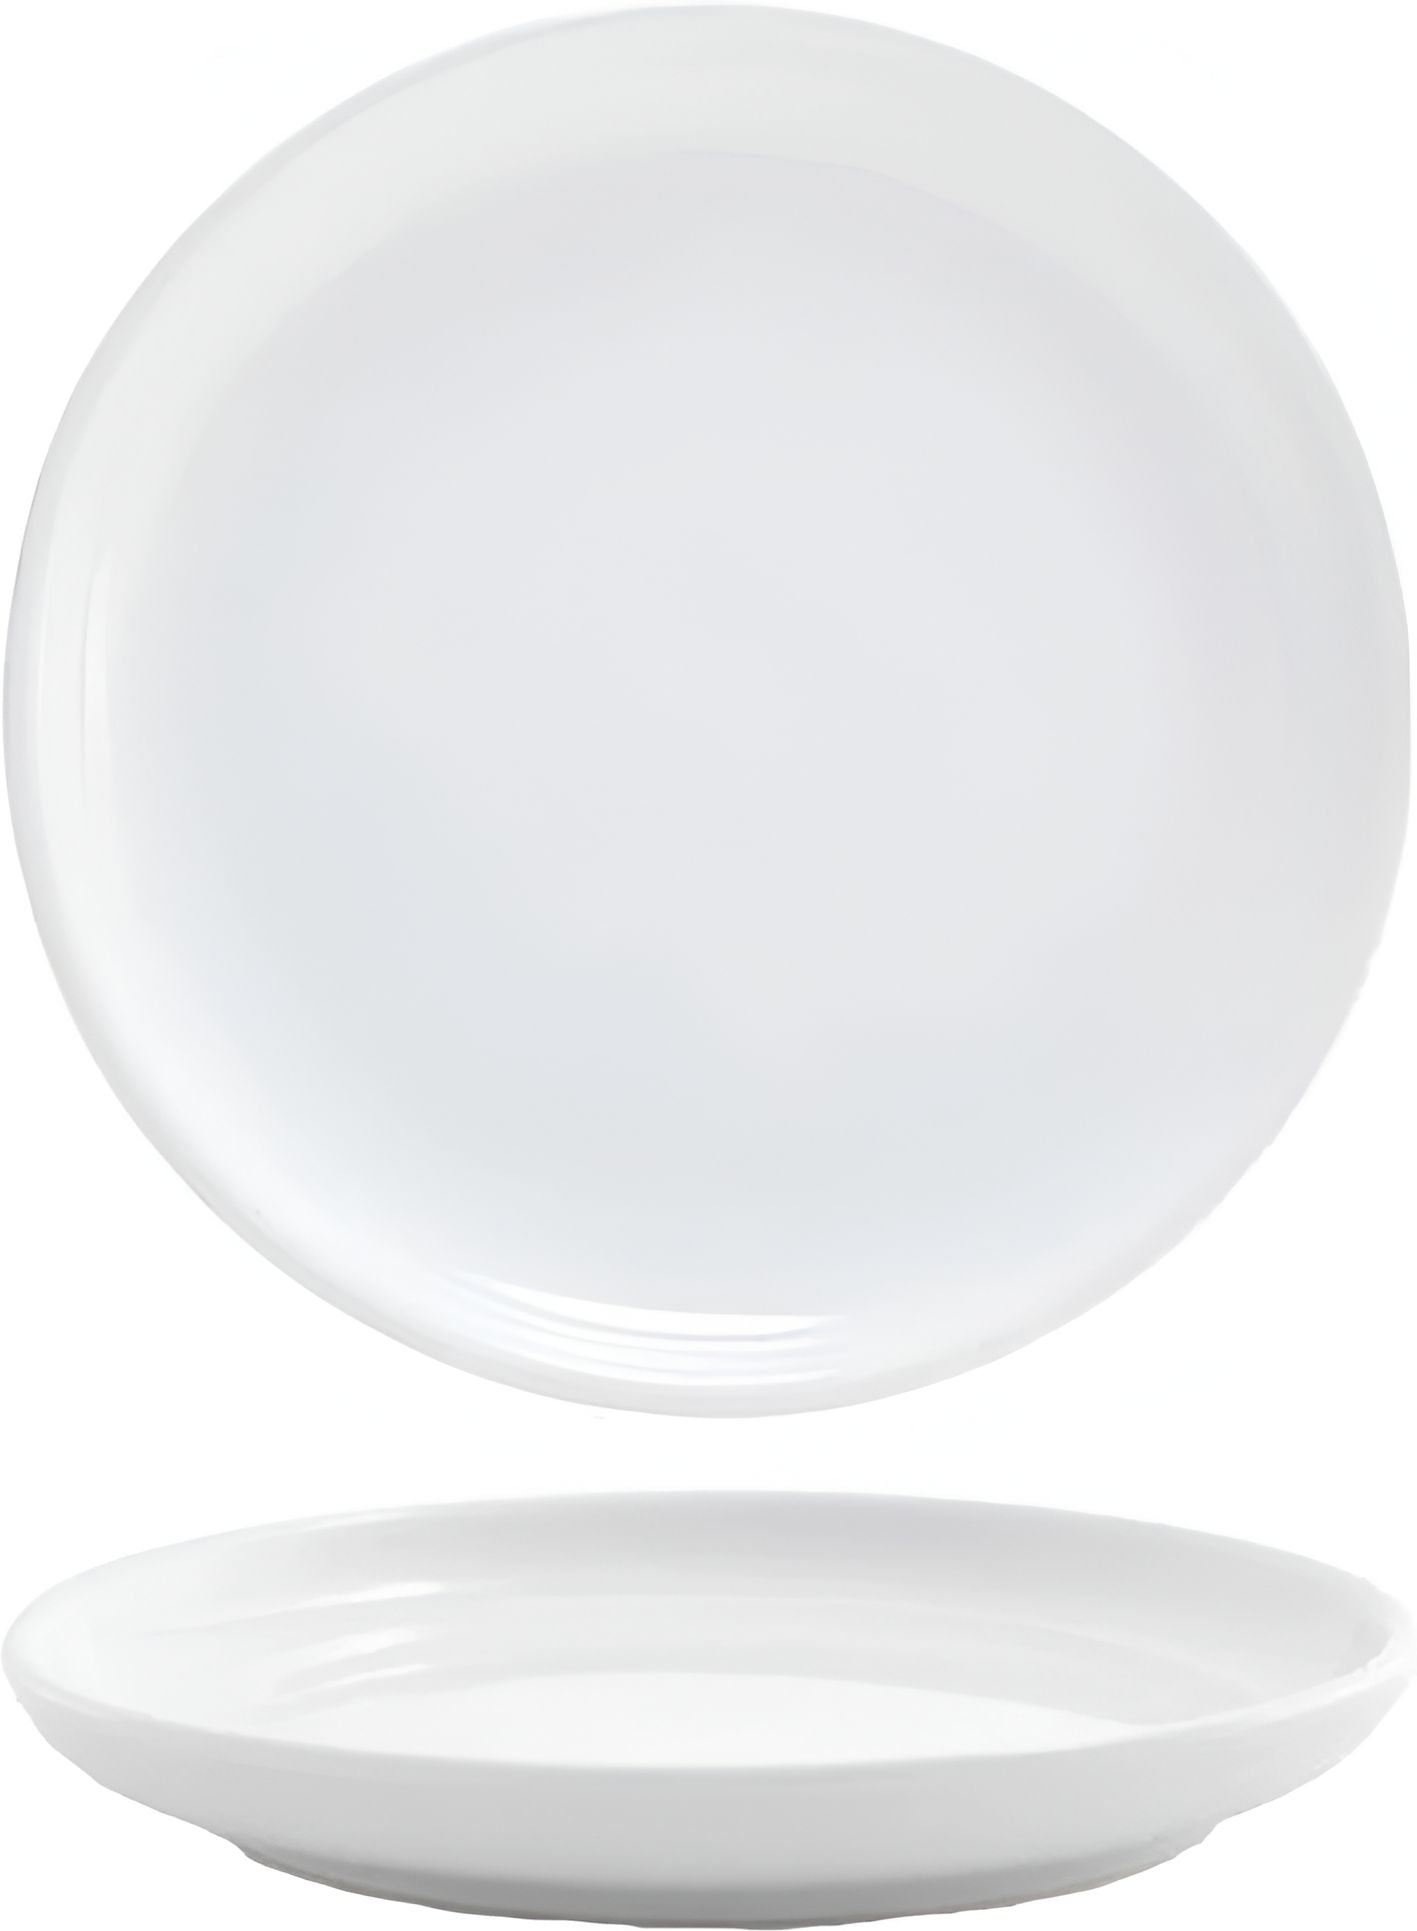 Front Of The House - 7.5" Bright White Coupe Round Porcelain Plate, Set of 12 - DSP018WHP23